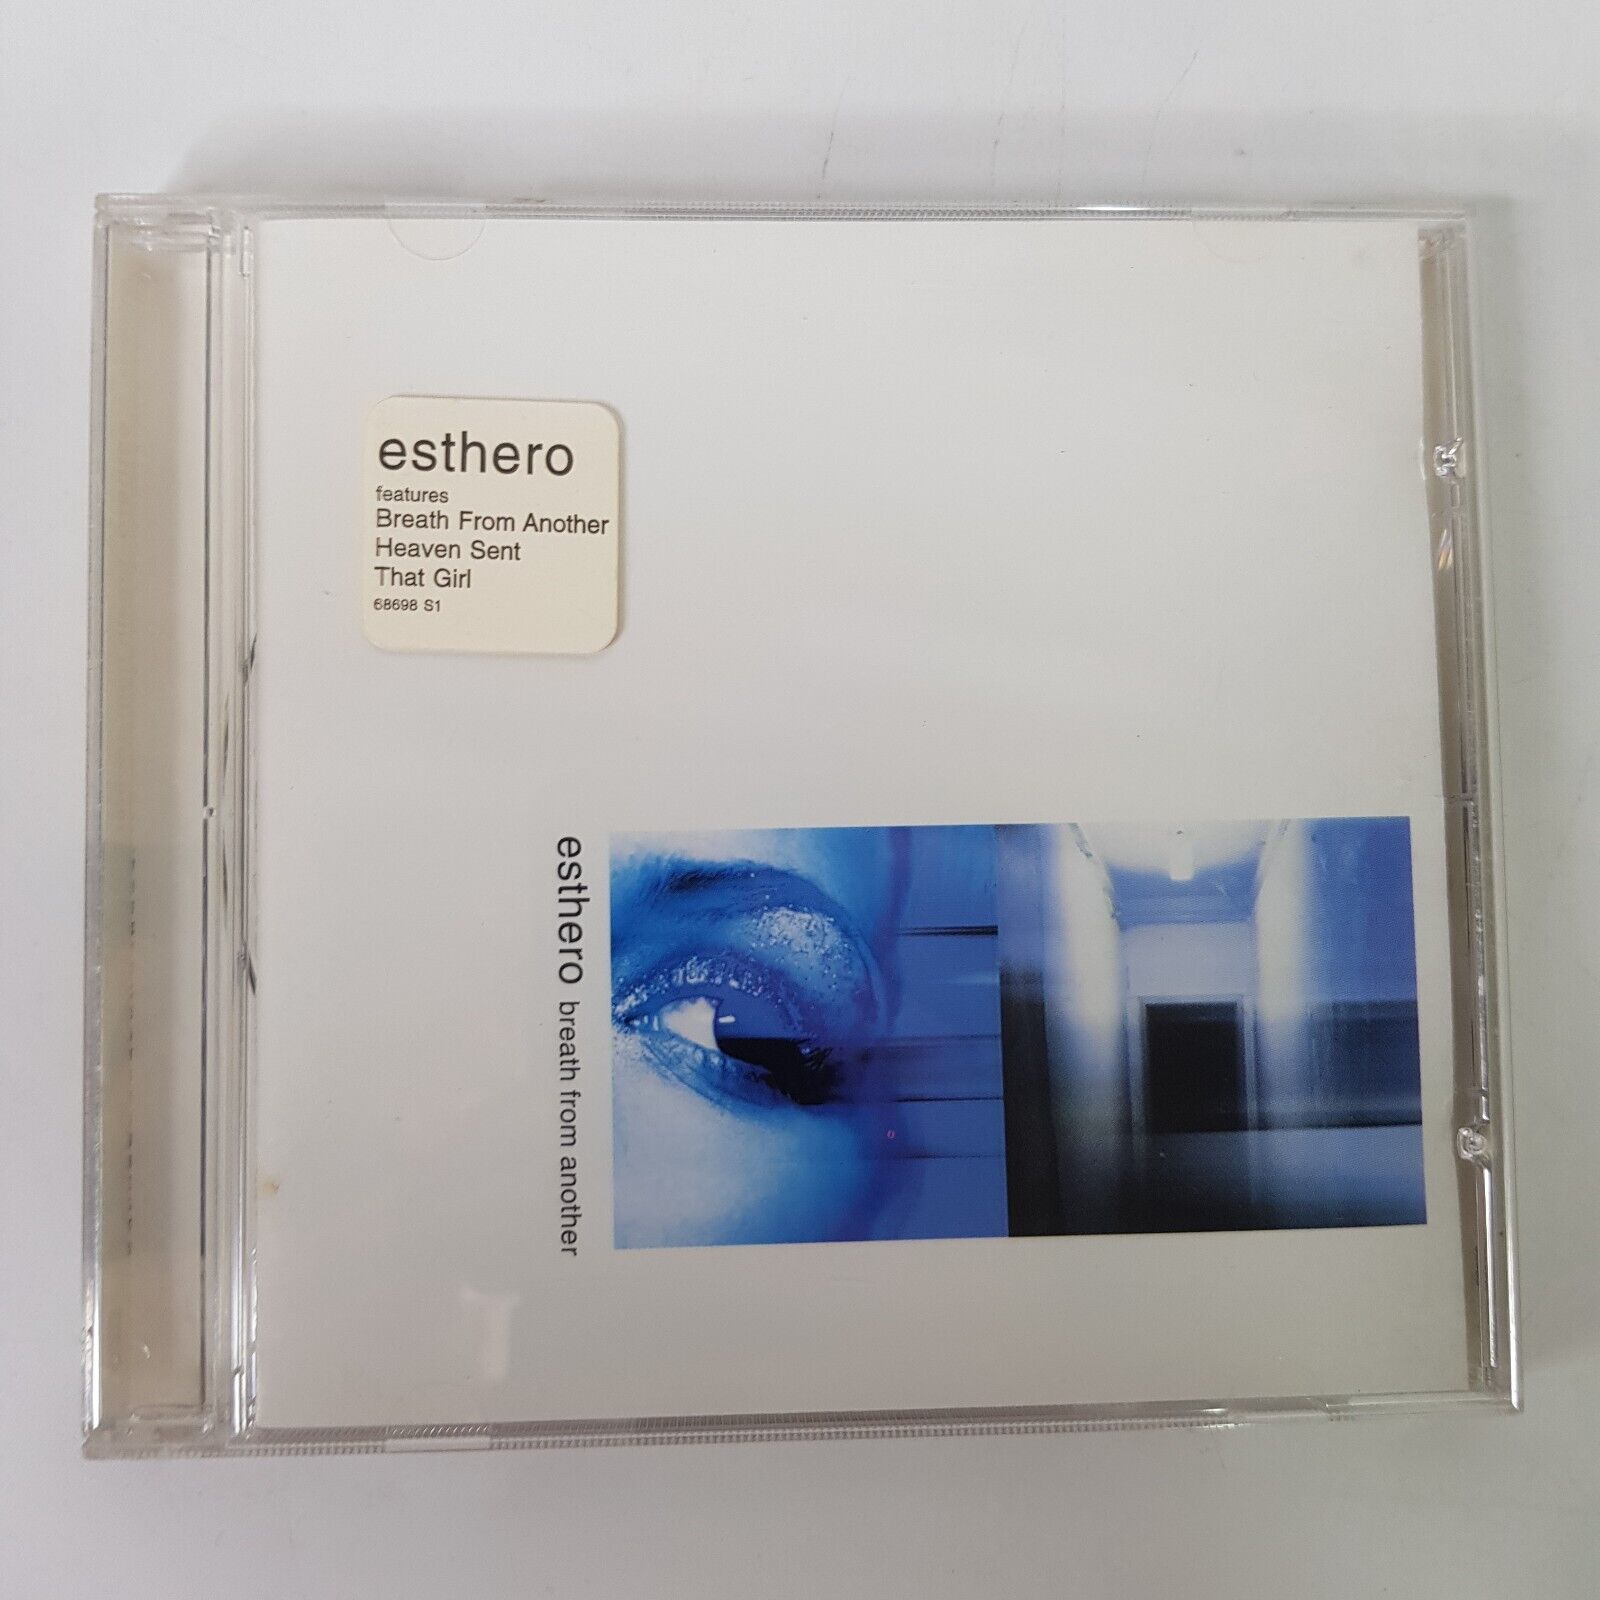 Esthero Breath From Another Heaven Sent Anywayz Flipher Overture Lounge 1999 CD